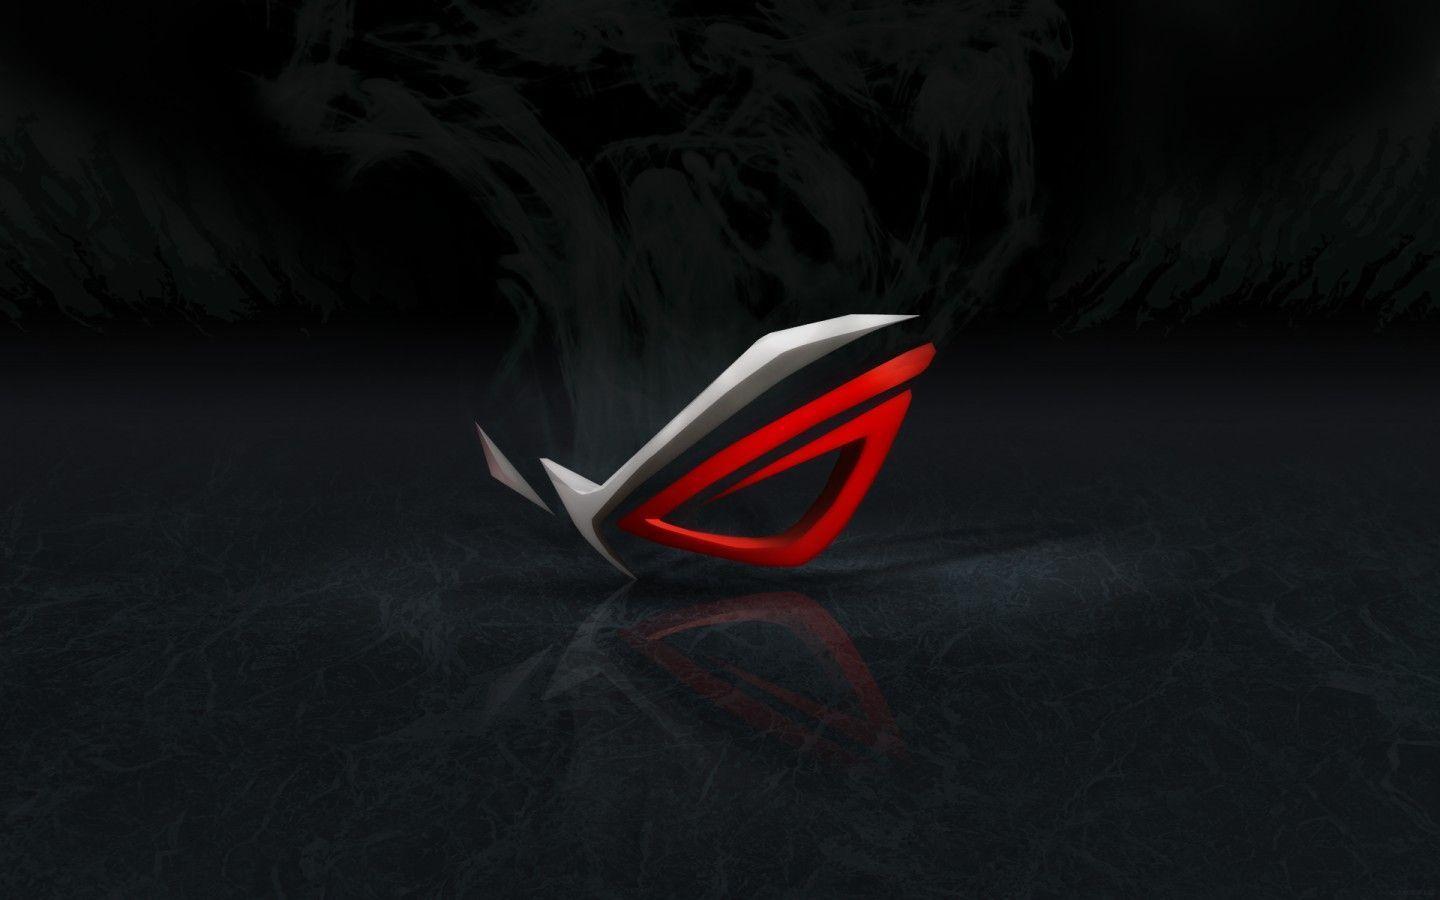 Asus Rog Computer Eye Hd Jootix with 1440x900 Resolution Wallpapers